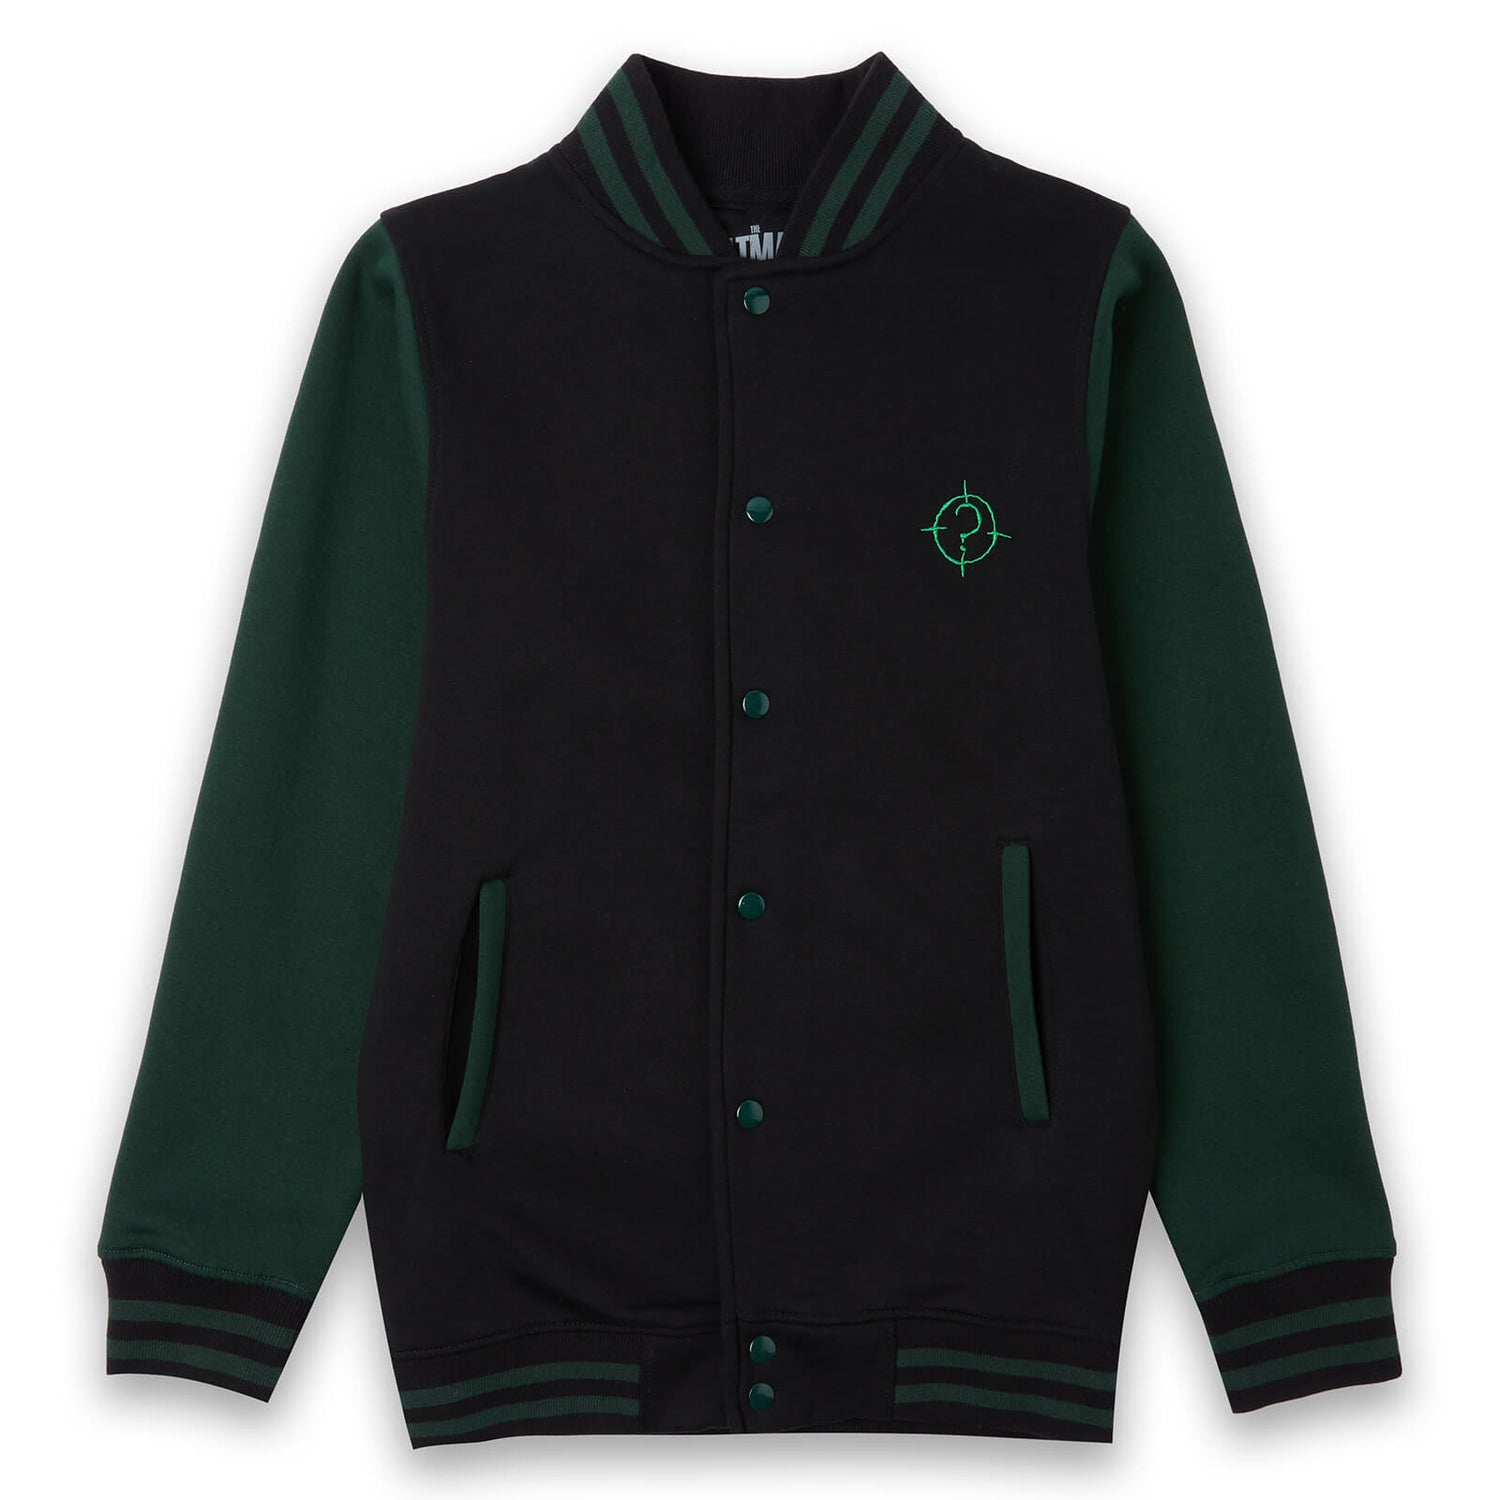 The Batman Unmask The Truth Embroidered Varsity Jacket - Black/Green